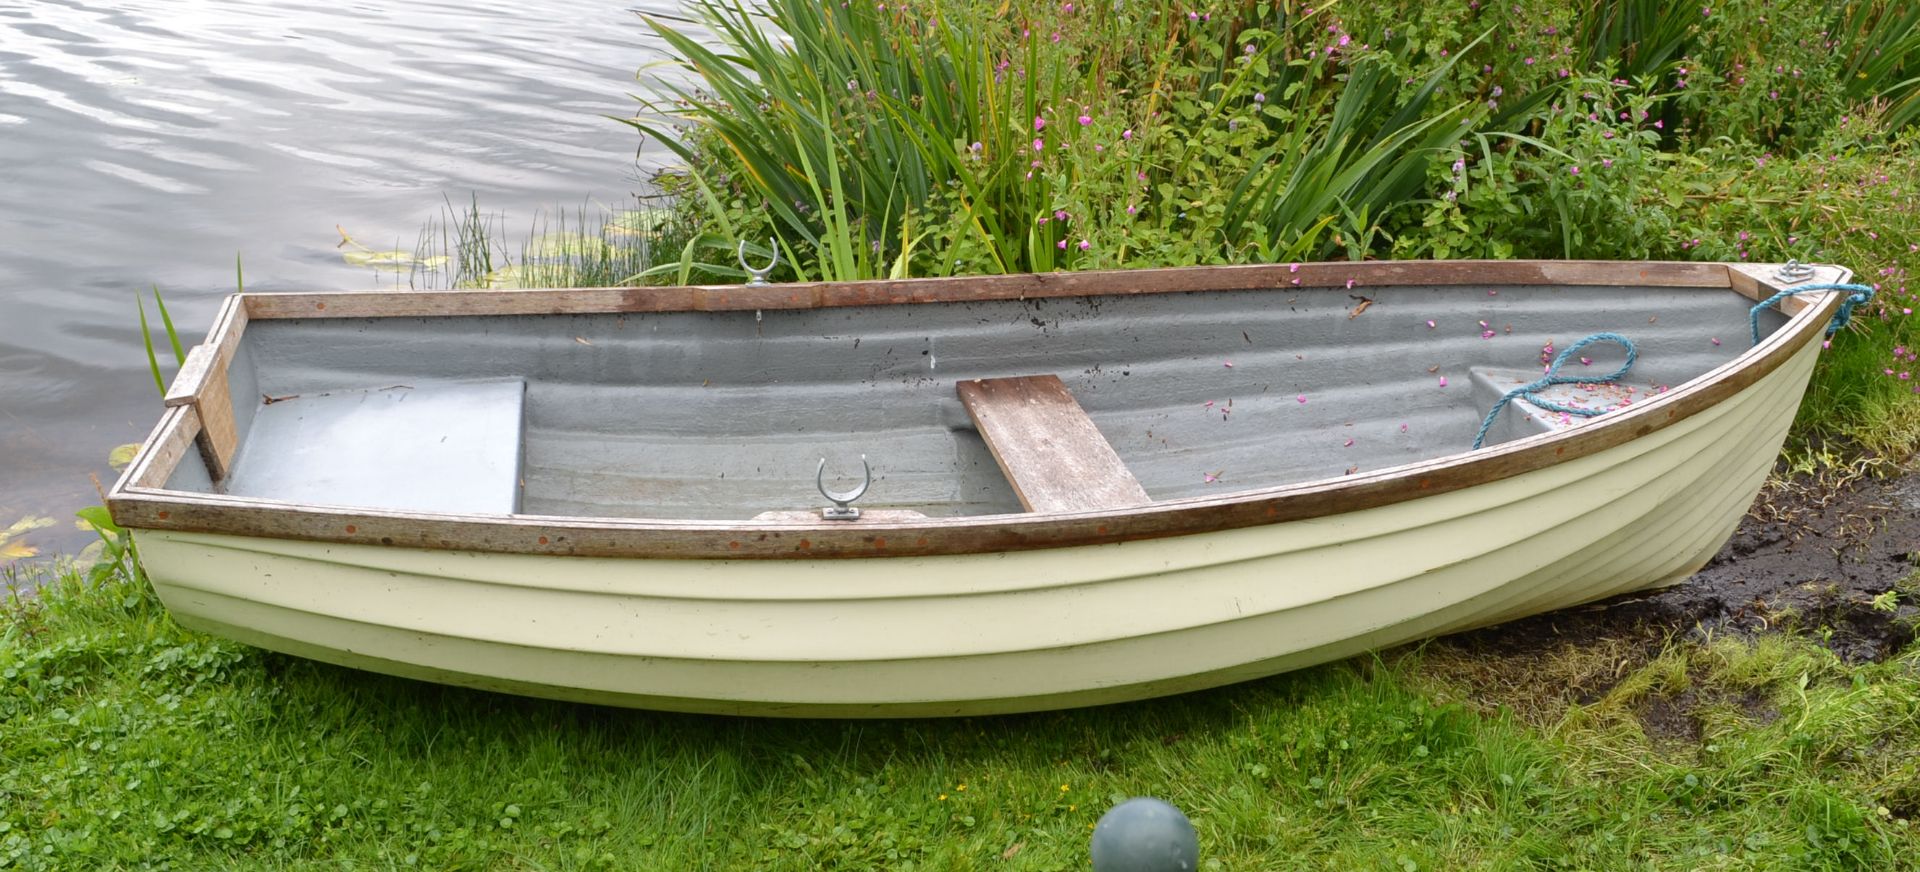 1 x Clovelly 290 Glass Fibre Rowing Boat - 240Kg Maximum Load - CL226 - Location: Knutsford WA16 - Image 4 of 15